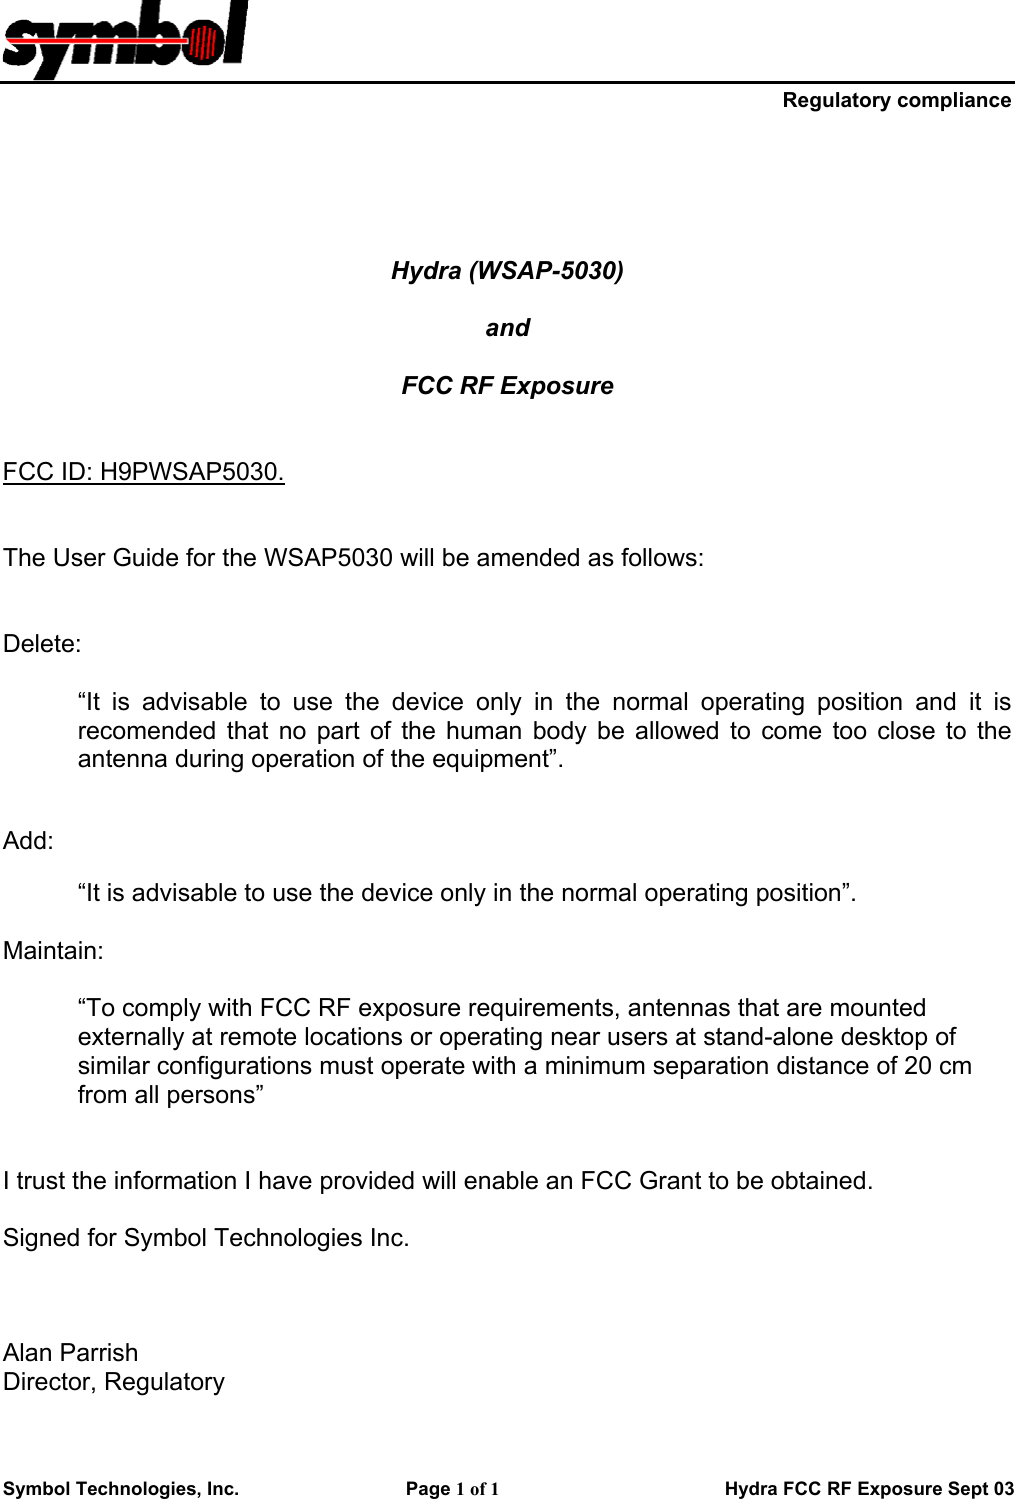     Regulatory compliance Symbol Technologies, Inc.    Page 1 of 1                       Hydra FCC RF Exposure Sept 03      Hydra (WSAP-5030)  and   FCC RF Exposure   FCC ID: H9PWSAP5030.   The User Guide for the WSAP5030 will be amended as follows:   Delete:  “It is advisable to use the device only in the normal operating position and it is recomended that no part of the human body be allowed to come too close to the antenna during operation of the equipment”.   Add:  “It is advisable to use the device only in the normal operating position”.  Maintain:  “To comply with FCC RF exposure requirements, antennas that are mounted externally at remote locations or operating near users at stand-alone desktop of similar configurations must operate with a minimum separation distance of 20 cm from all persons”   I trust the information I have provided will enable an FCC Grant to be obtained.  Signed for Symbol Technologies Inc.     Alan Parrish Director, Regulatory   